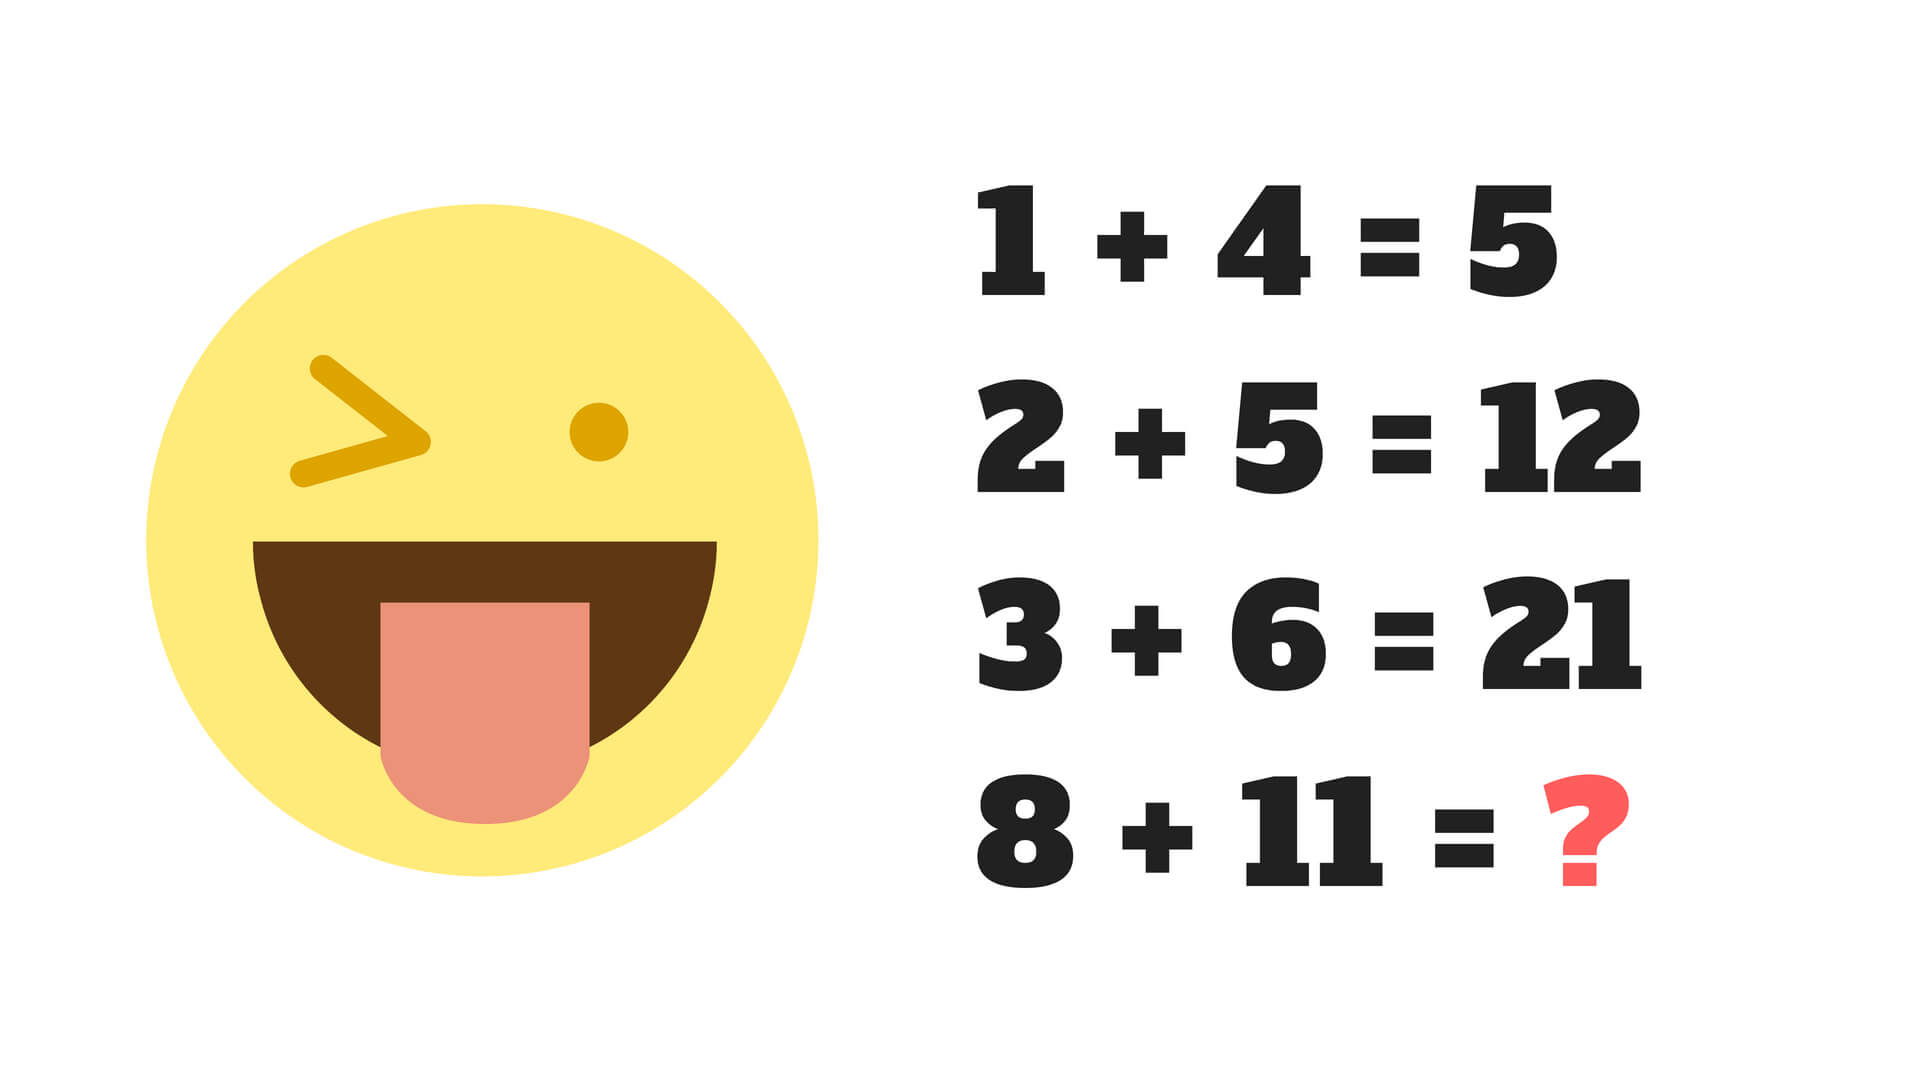 Only people with high IQ can solve this test